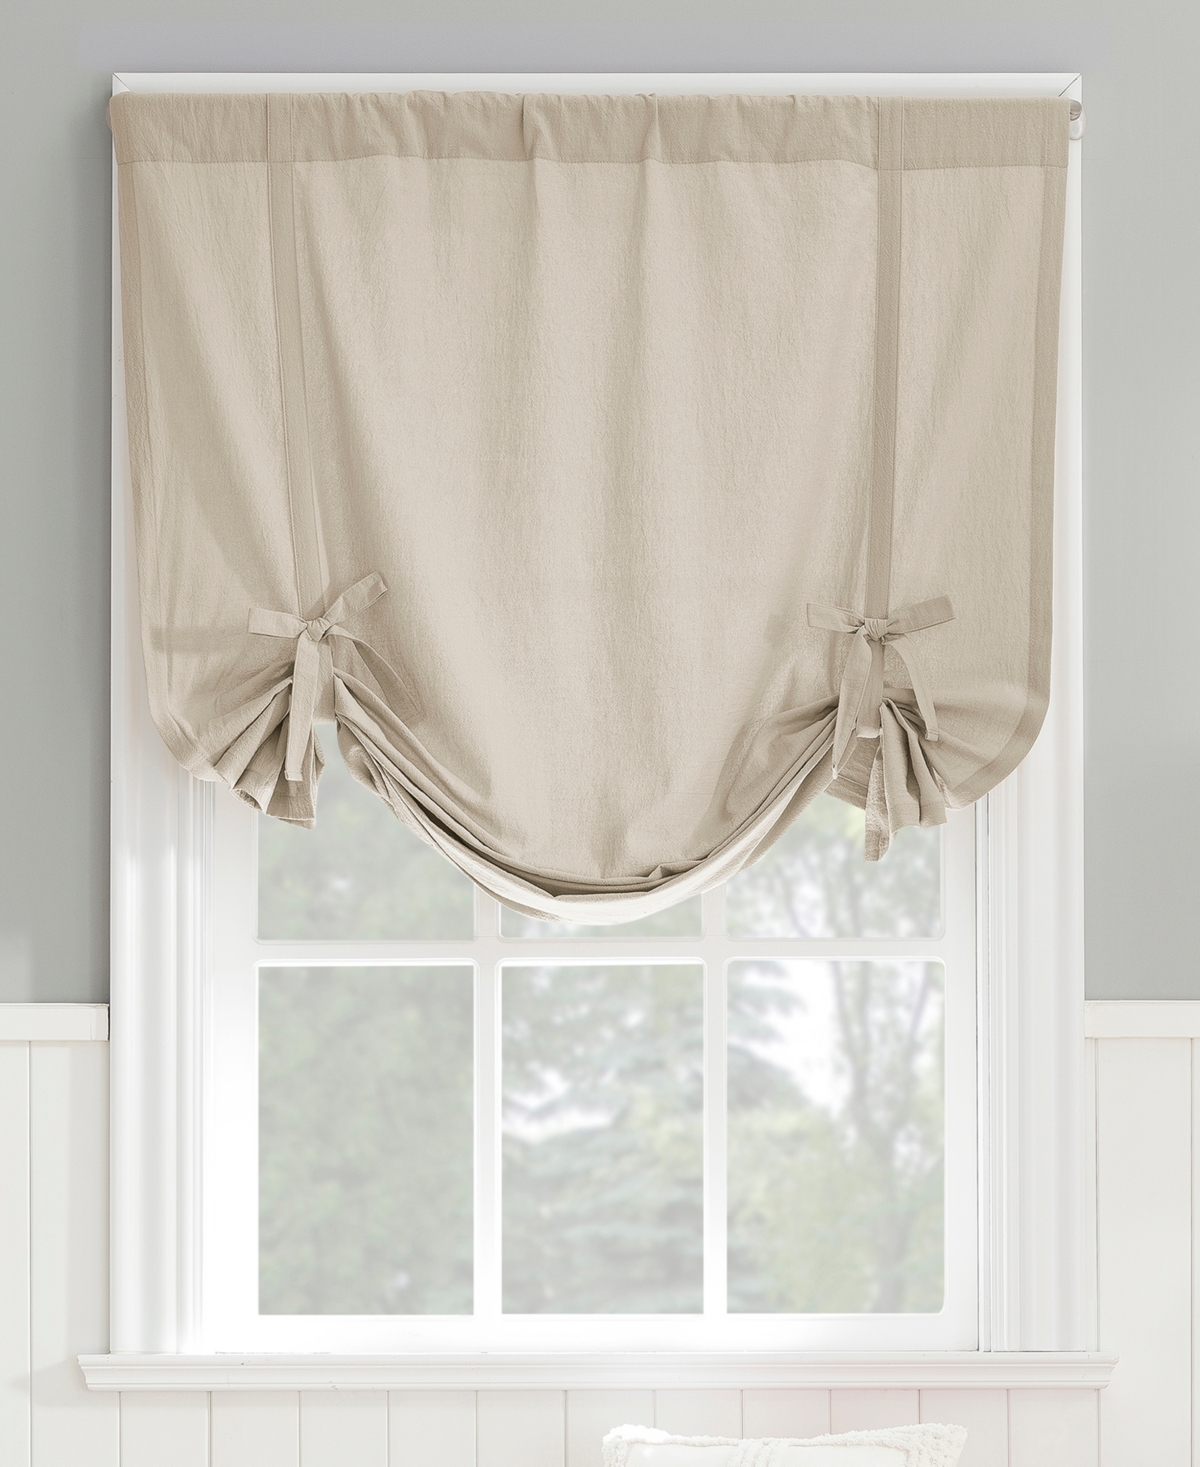 Archaeo Washed Tie-up Shade Curtain, 63" X 42" In Oatmeal